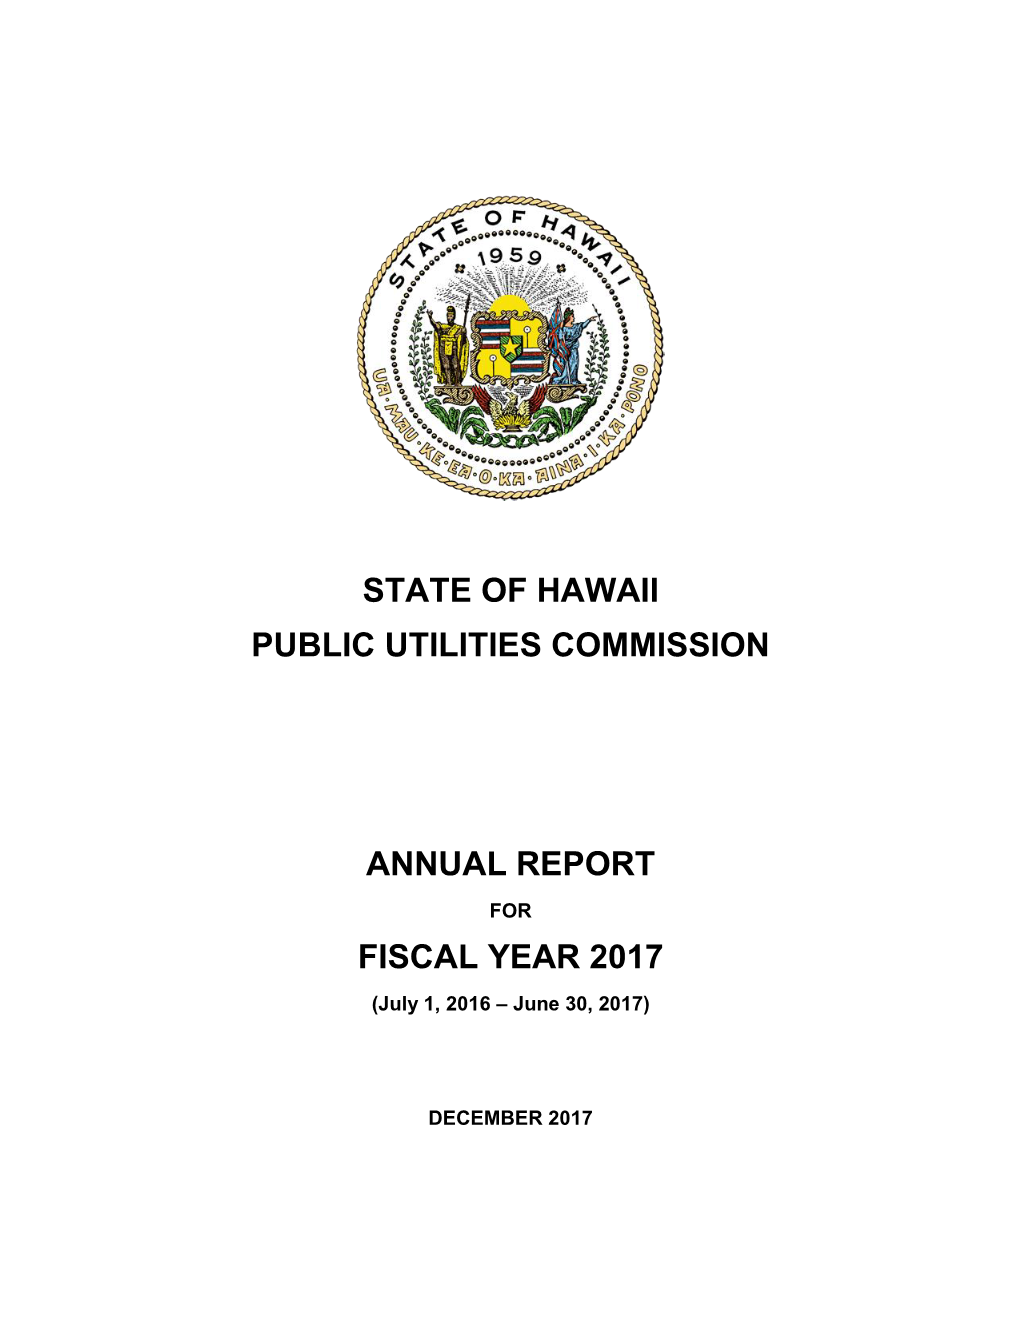 PUC Annual Report–Fiscal Year 2017